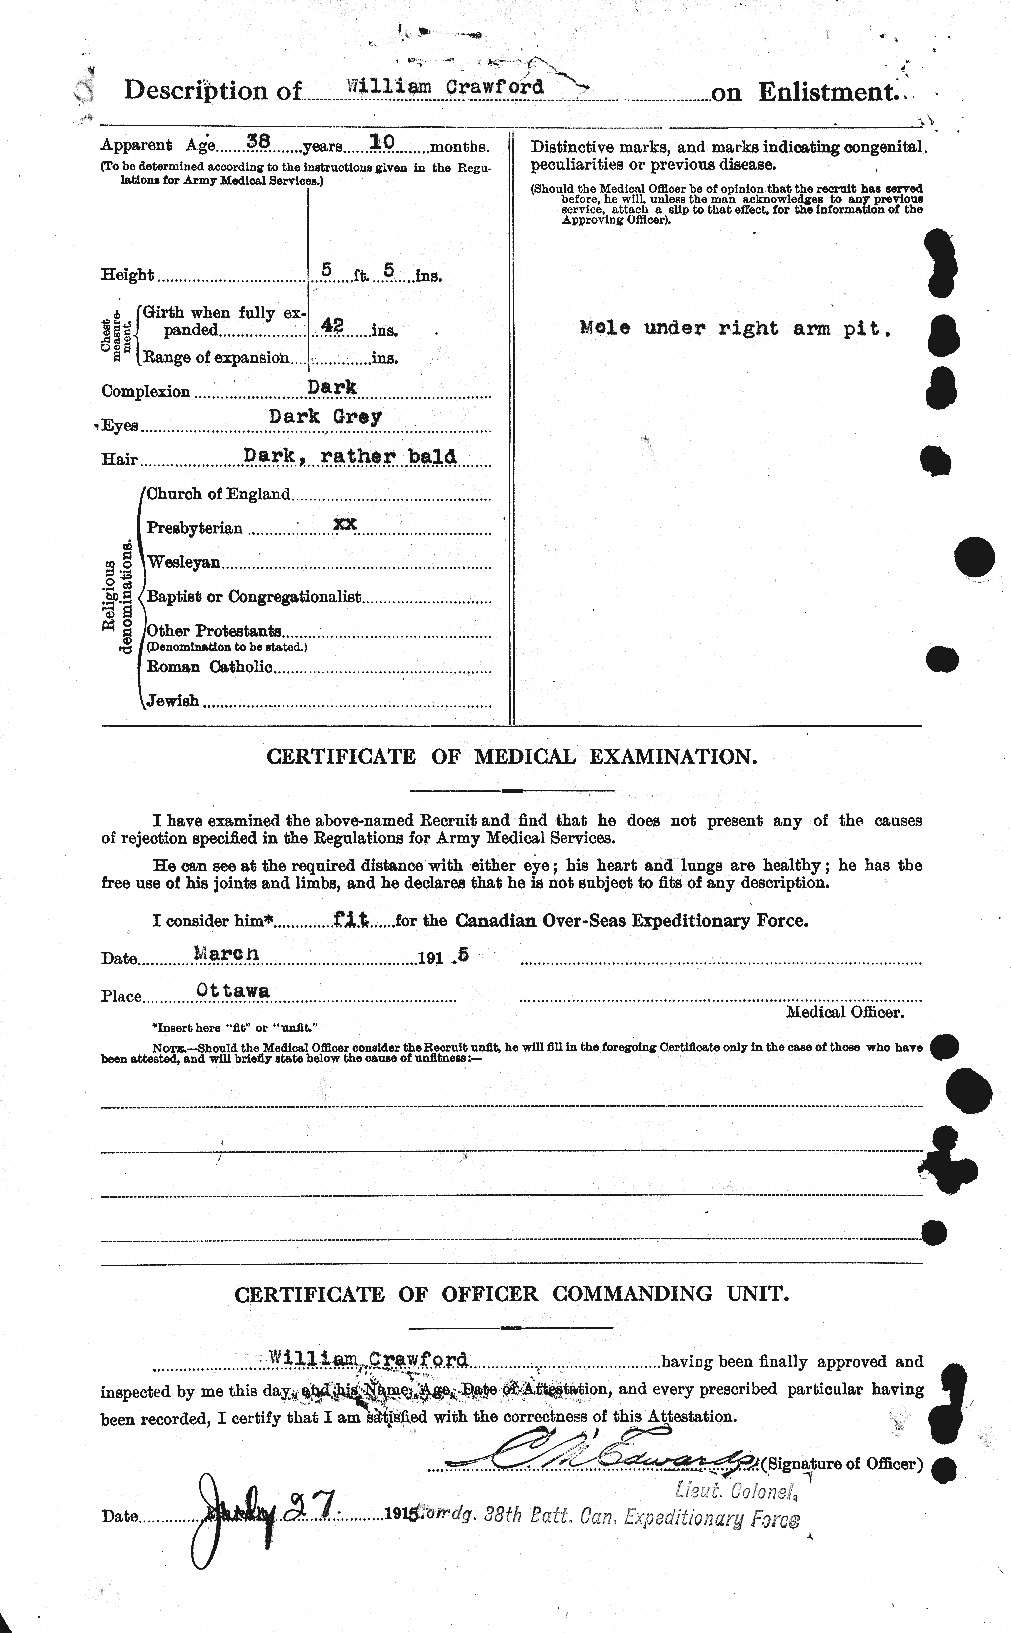 Personnel Records of the First World War - CEF 061159b